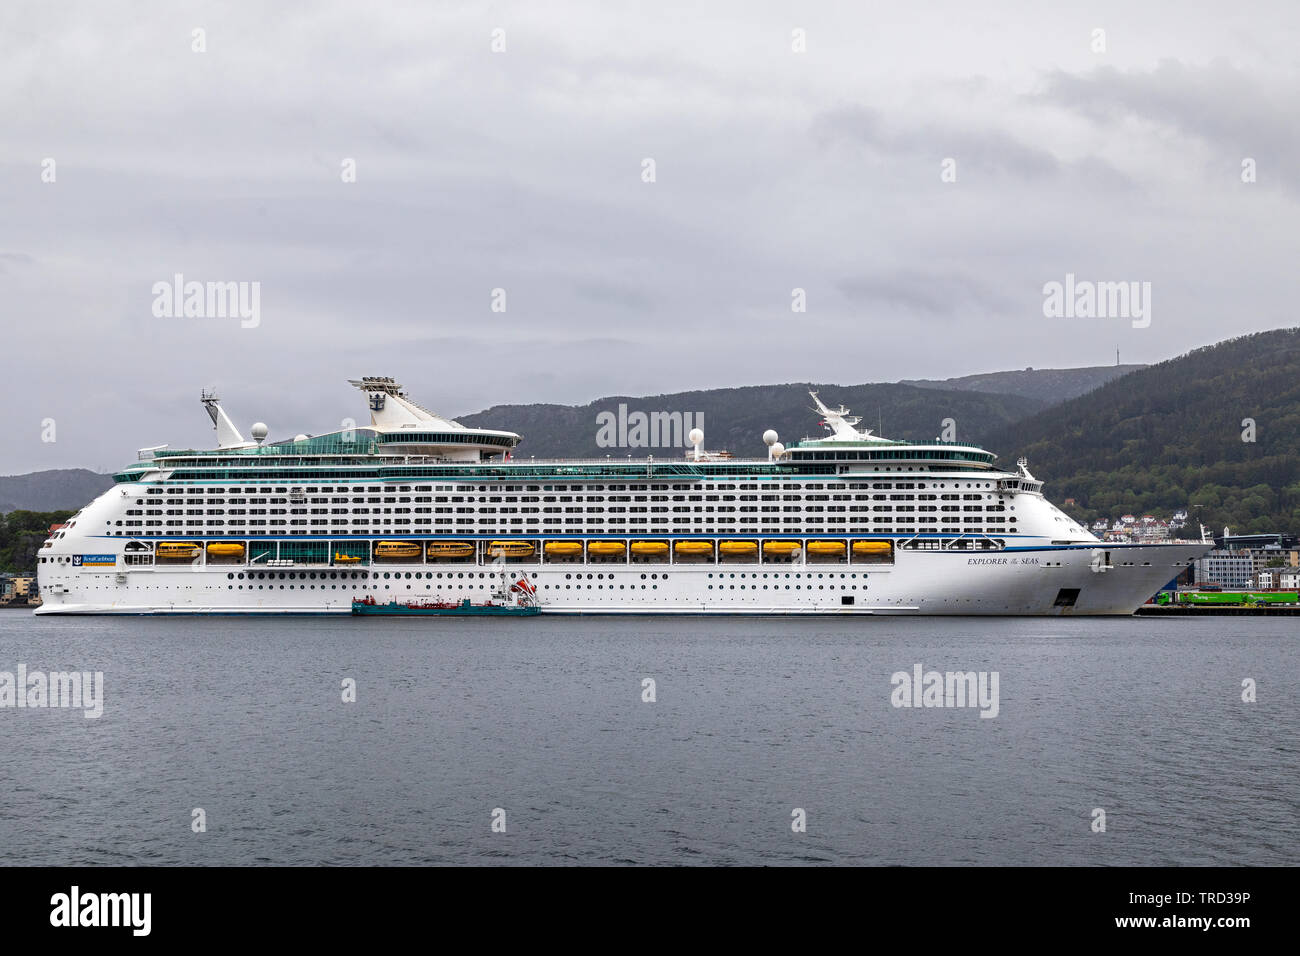 Cruise ship Explorer Of The Seas at Jekteviksterminalen terminal in the port of Bergen, Norway. A rainful and cloudy day. Tanker Oslo Tank delivering Stock Photo